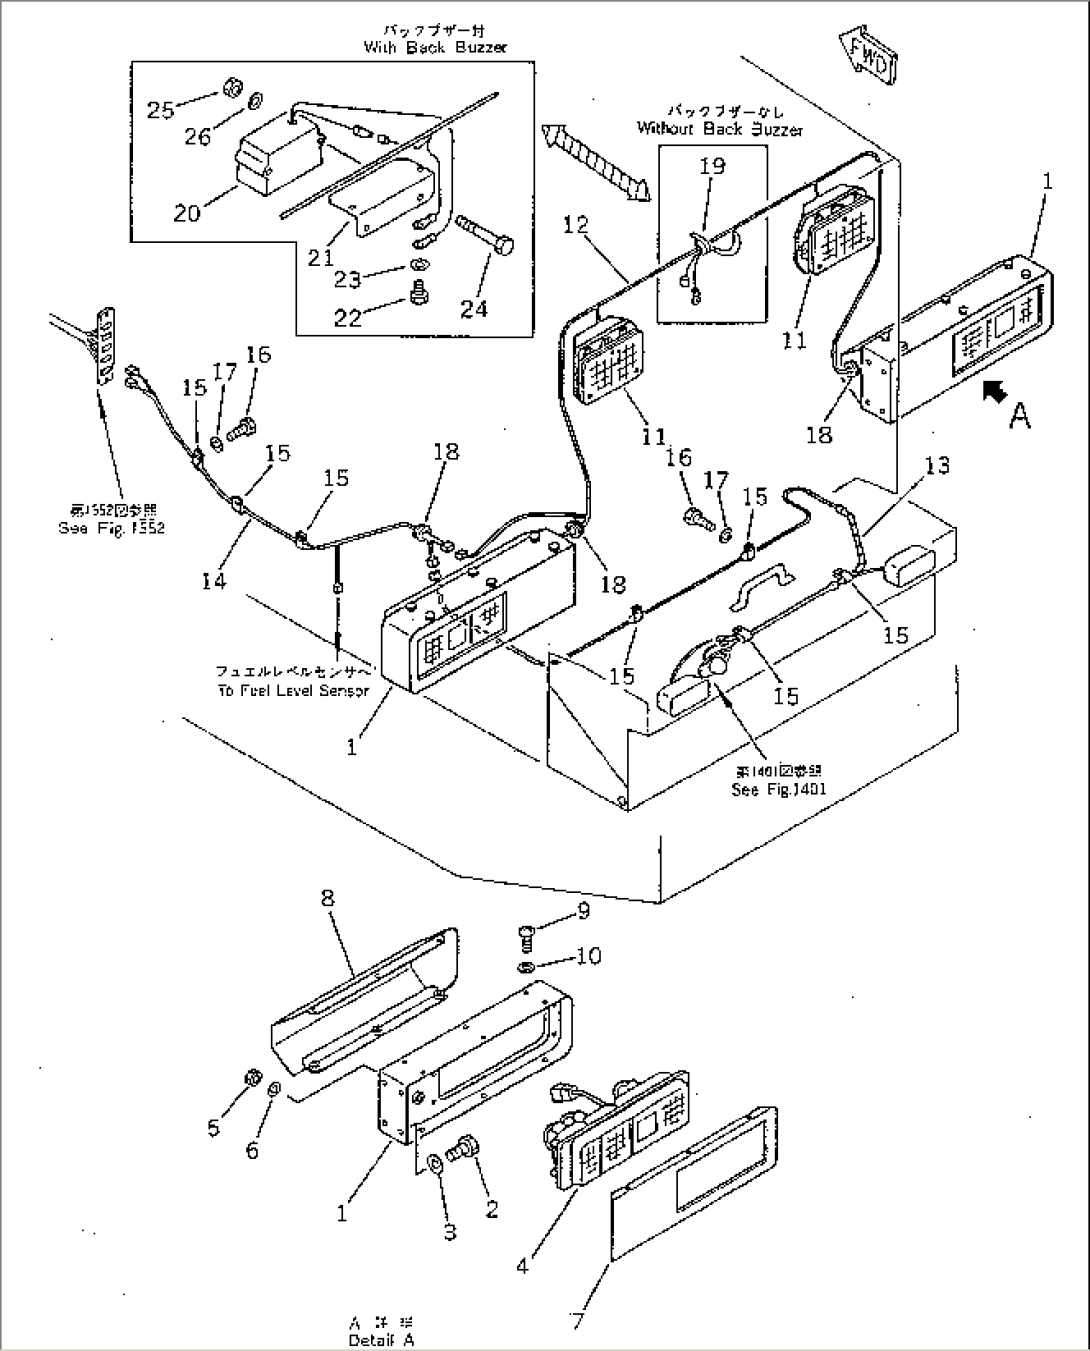 ELECTRICAL SYSTEM (REAR)(#10001-19999)